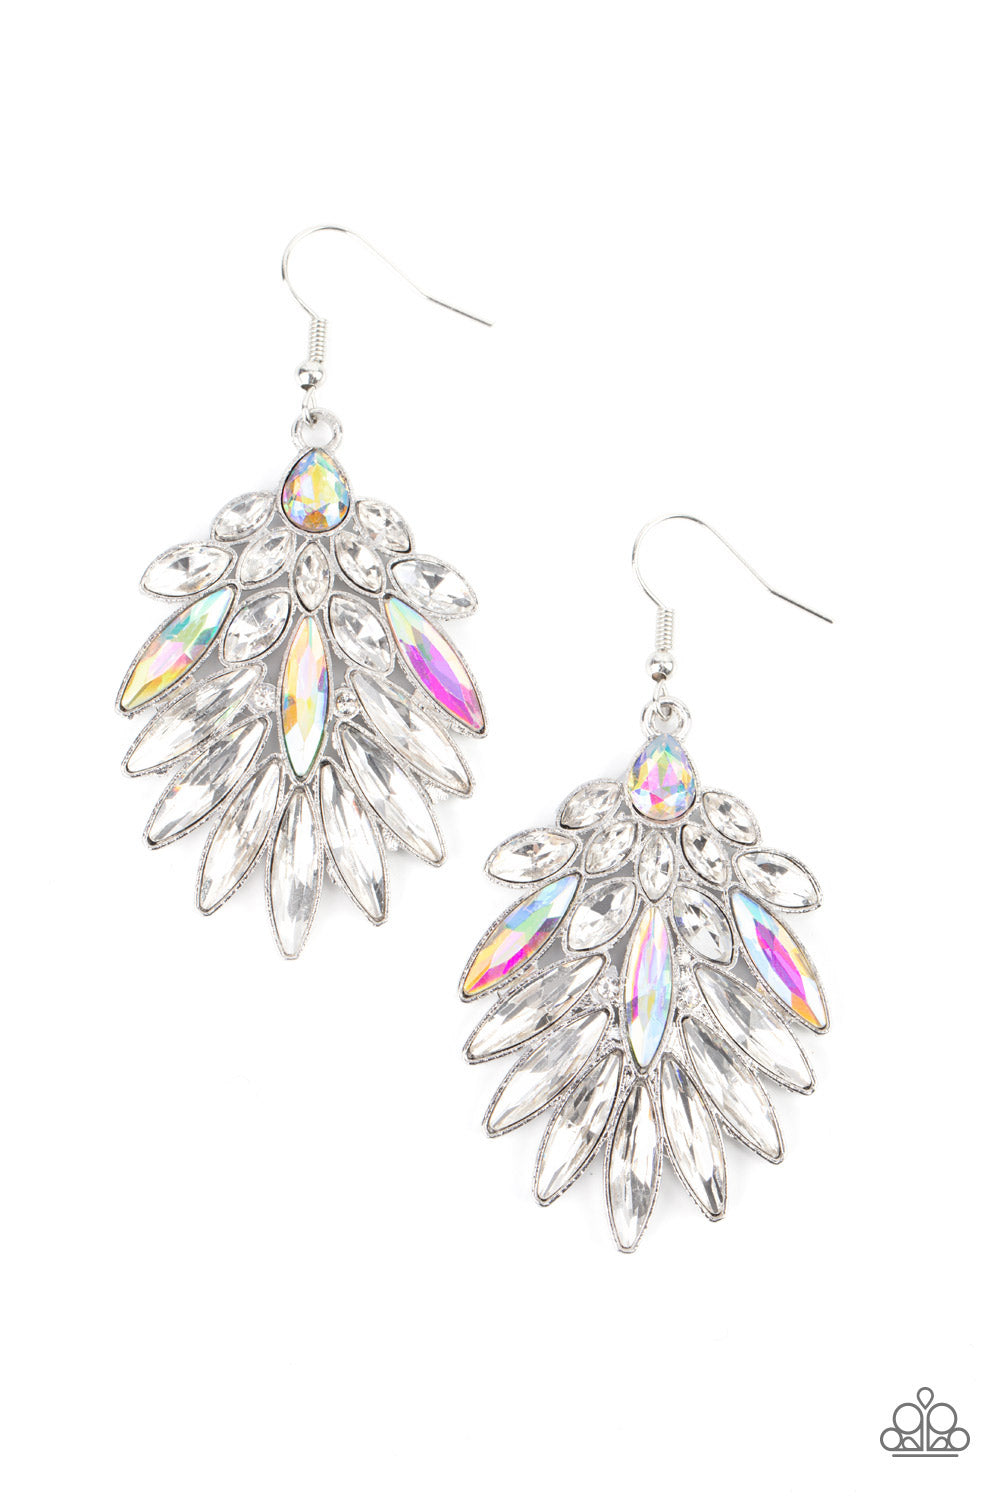 COSMIC-politan Multi Iridescent Earring - Paparazzi Accessories    An iridescent teardrop rhinestone gives way to a sparkly fan of classic white and oblong iridescent marquise cut rhinestones, coalescing into an out-of-this-world statement piece. Earring attaches to a standard fishhook fitting.  Sold as one pair of earrings.